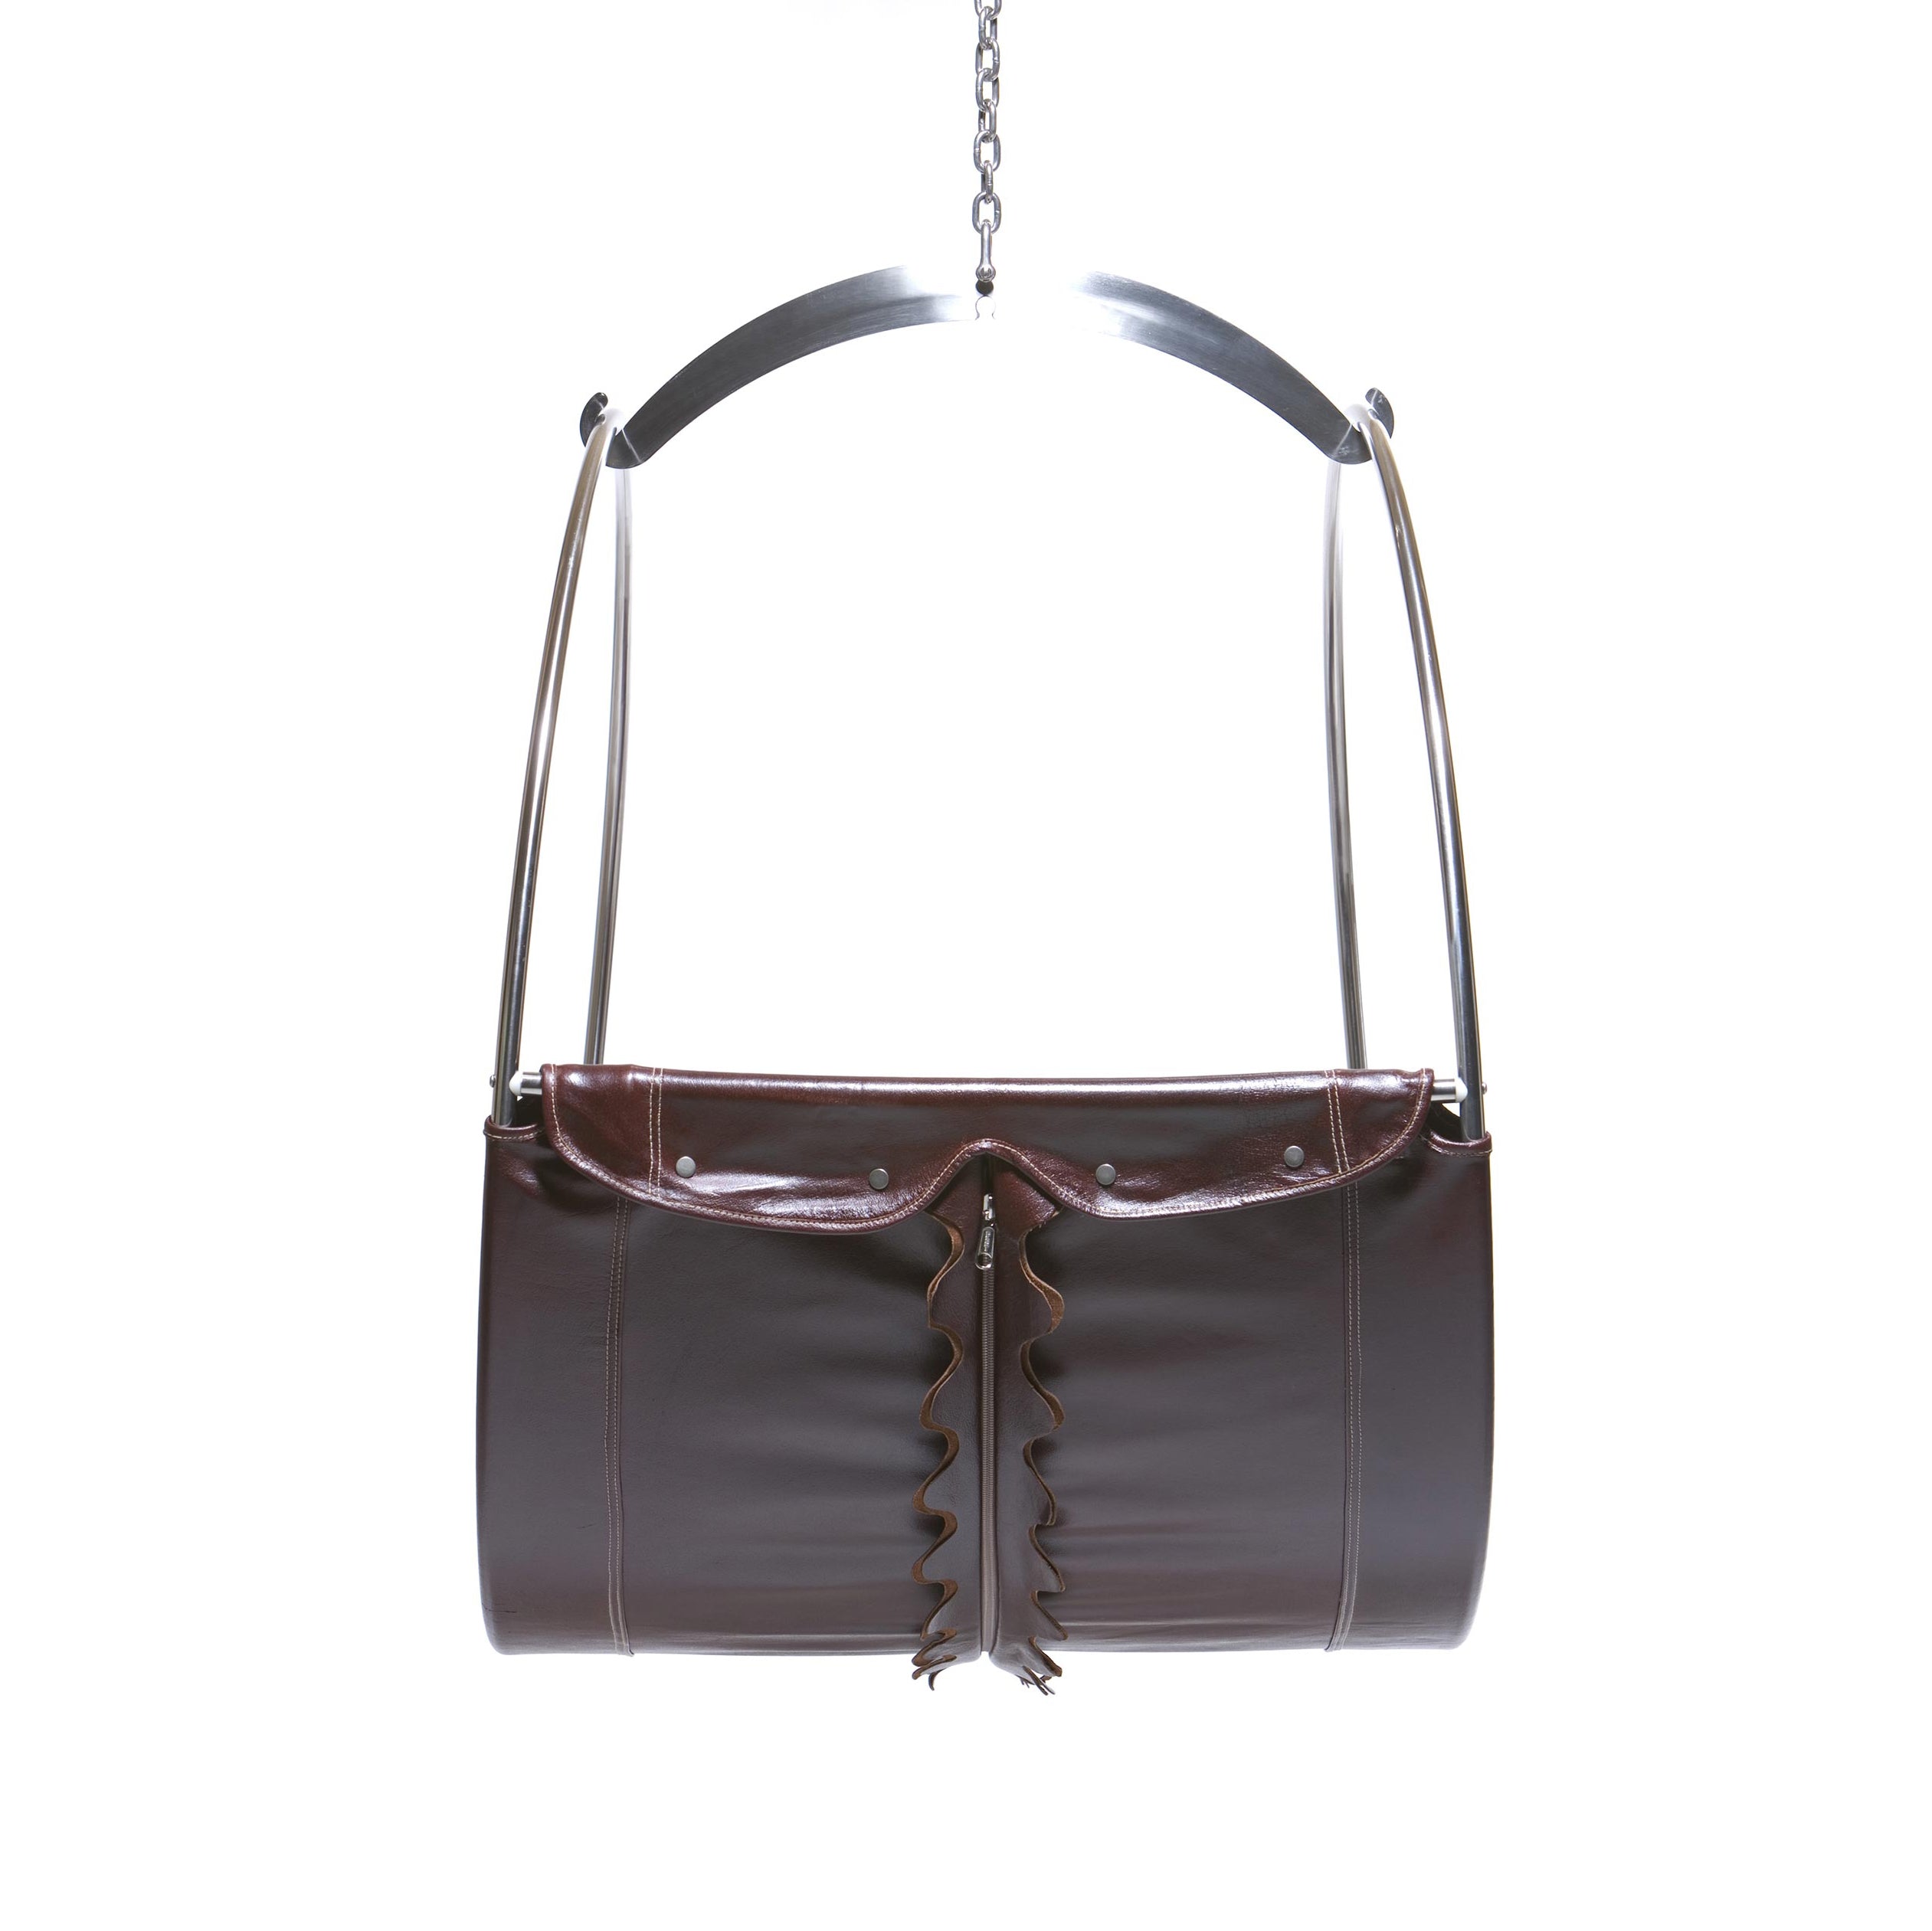 Leather Swing Chair